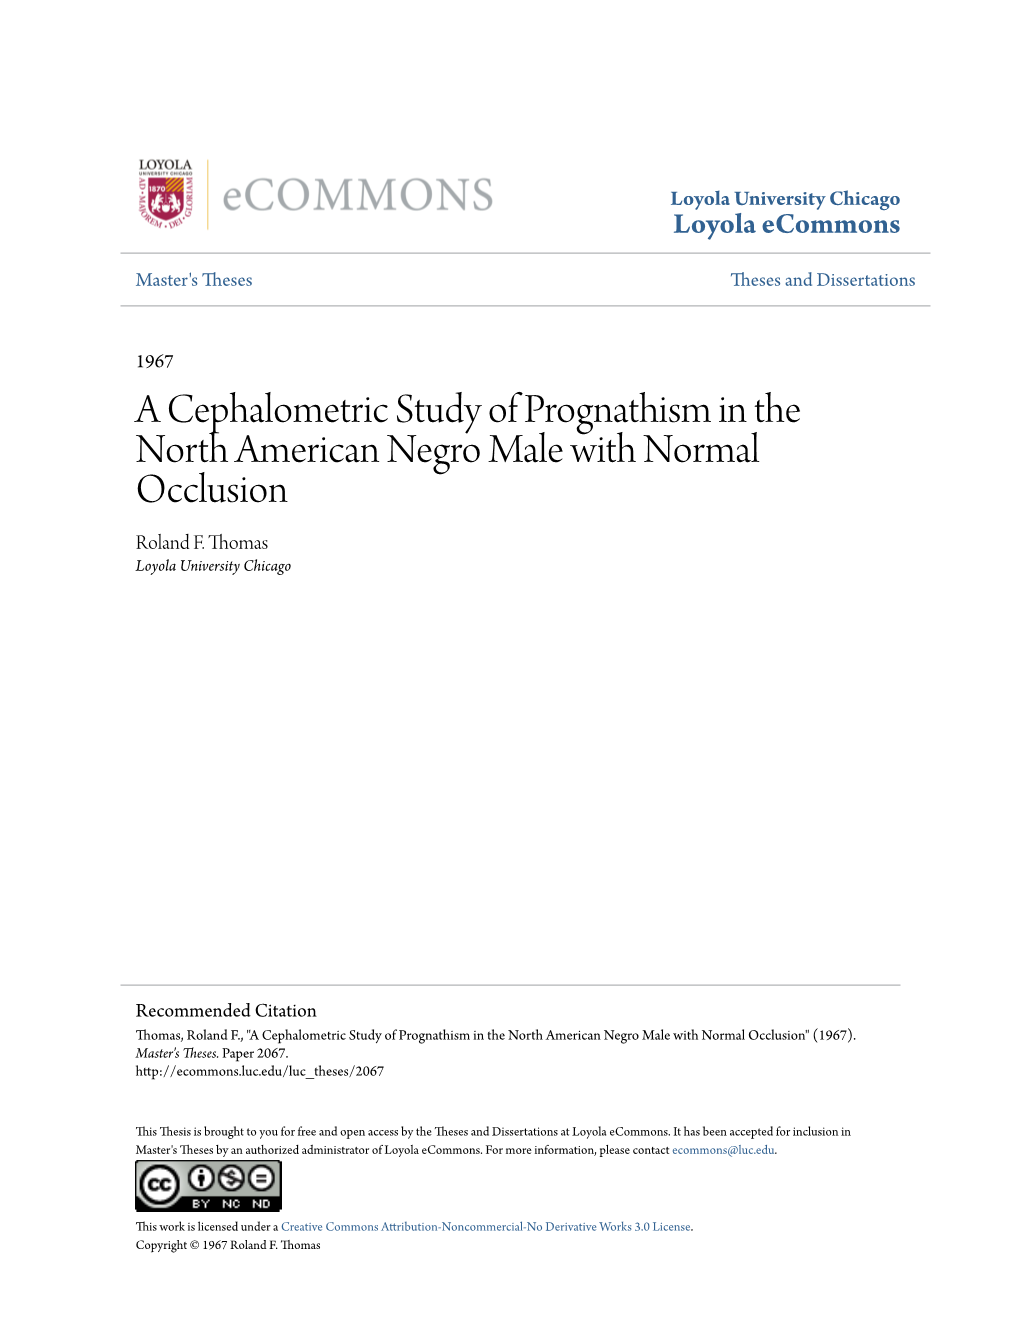 A Cephalometric Study of Prognathism in the North American Negro Male with Normal Occlusion Roland F